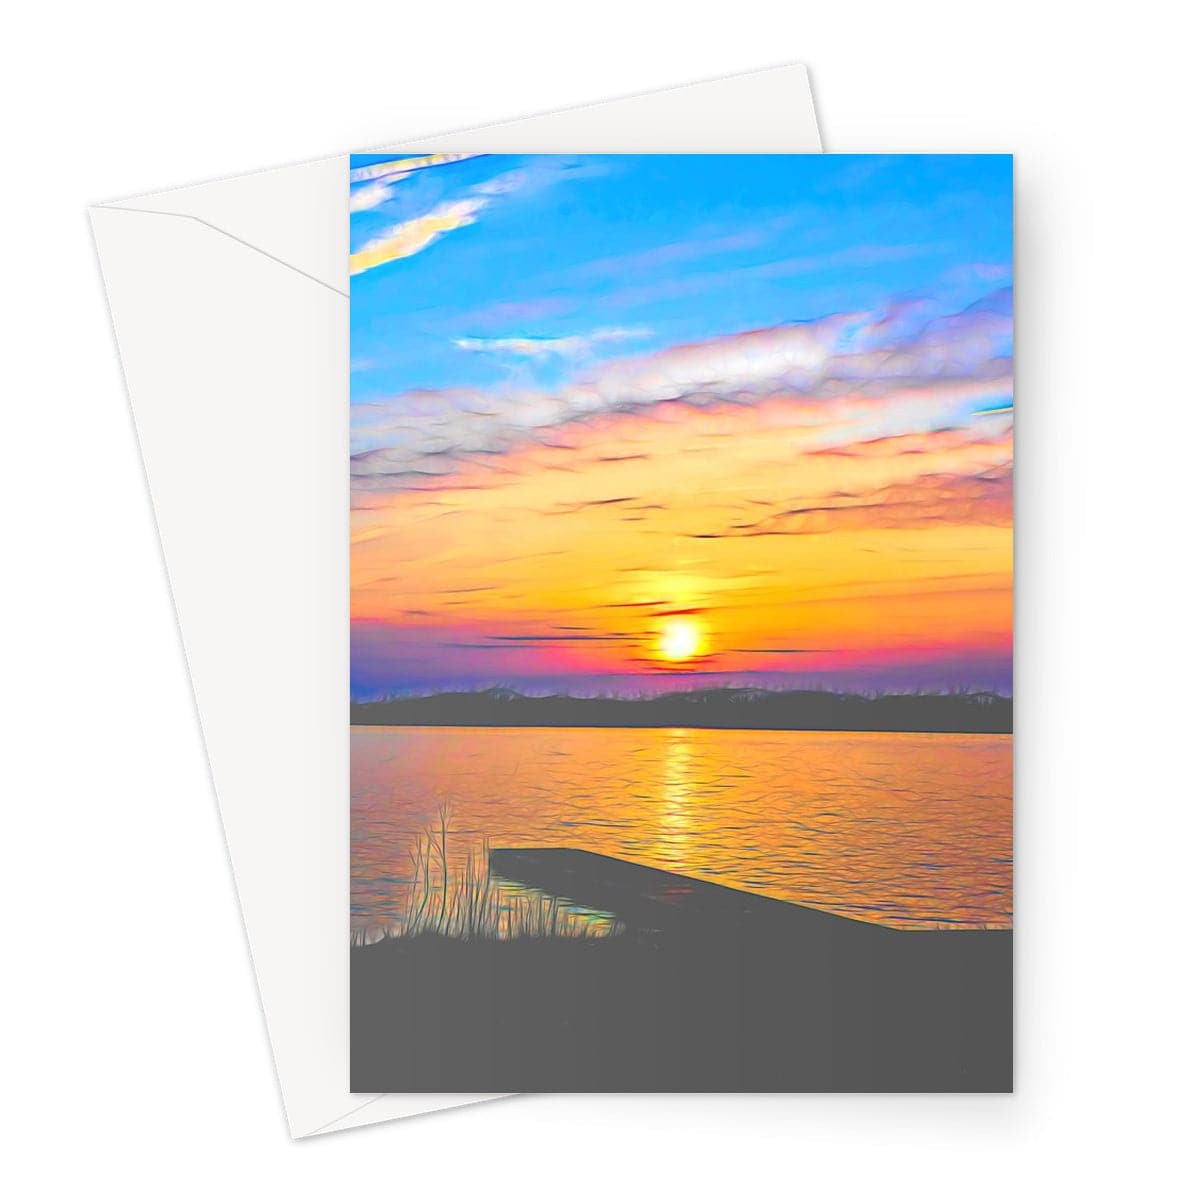 Sunset at Nannewied Greeting Card